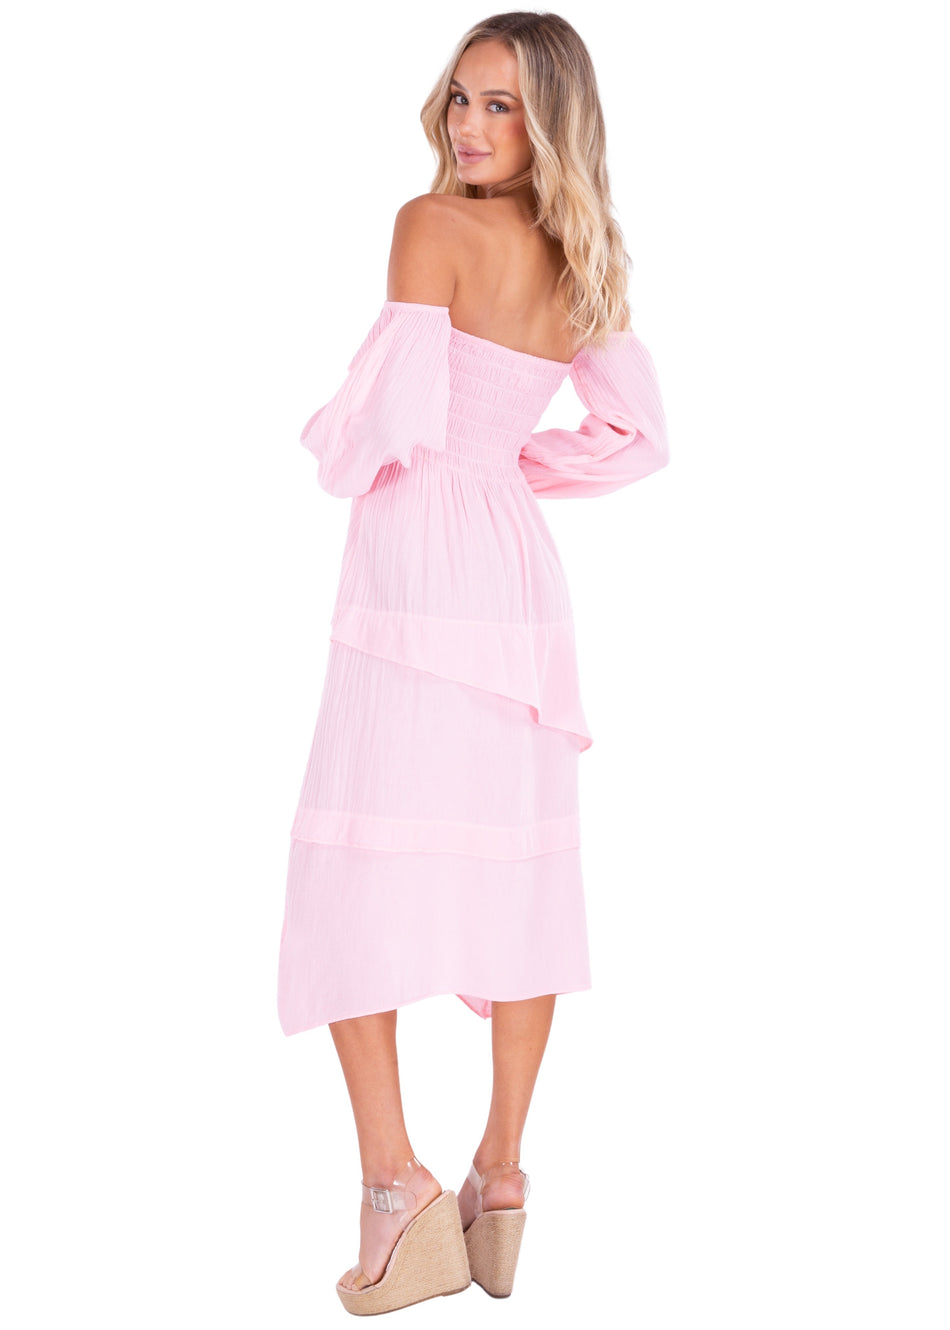 NW1427 - Baby Pink Cotton Dress